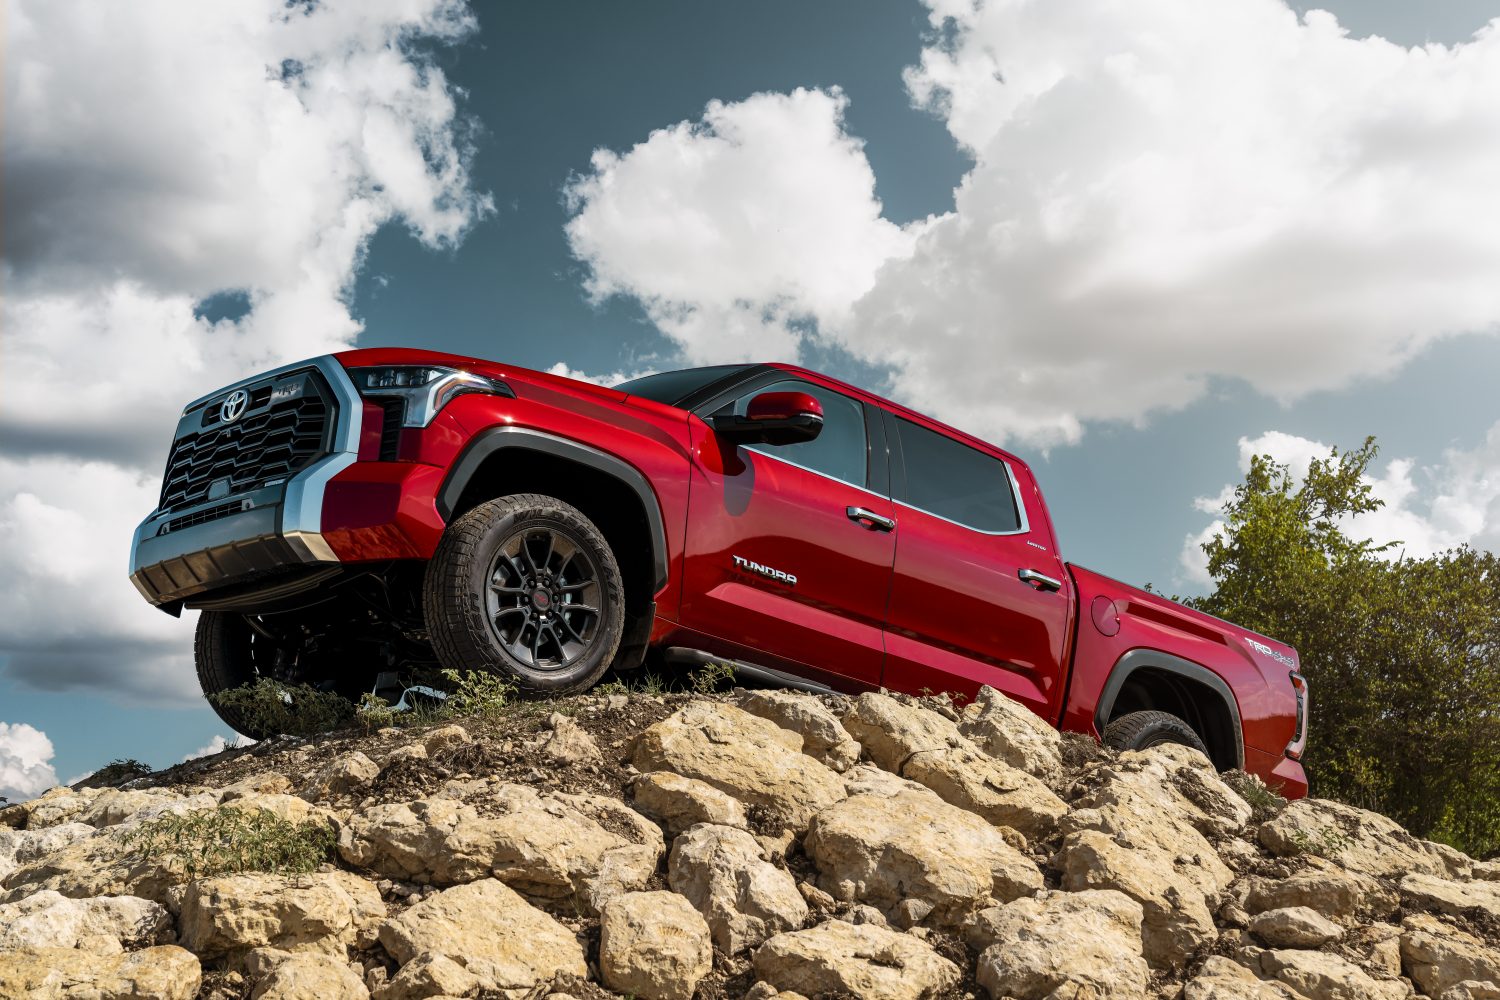 Red Toyota Tundra pickup truck shows off its TRD Off-Road package by parking atop a pile of rocks.